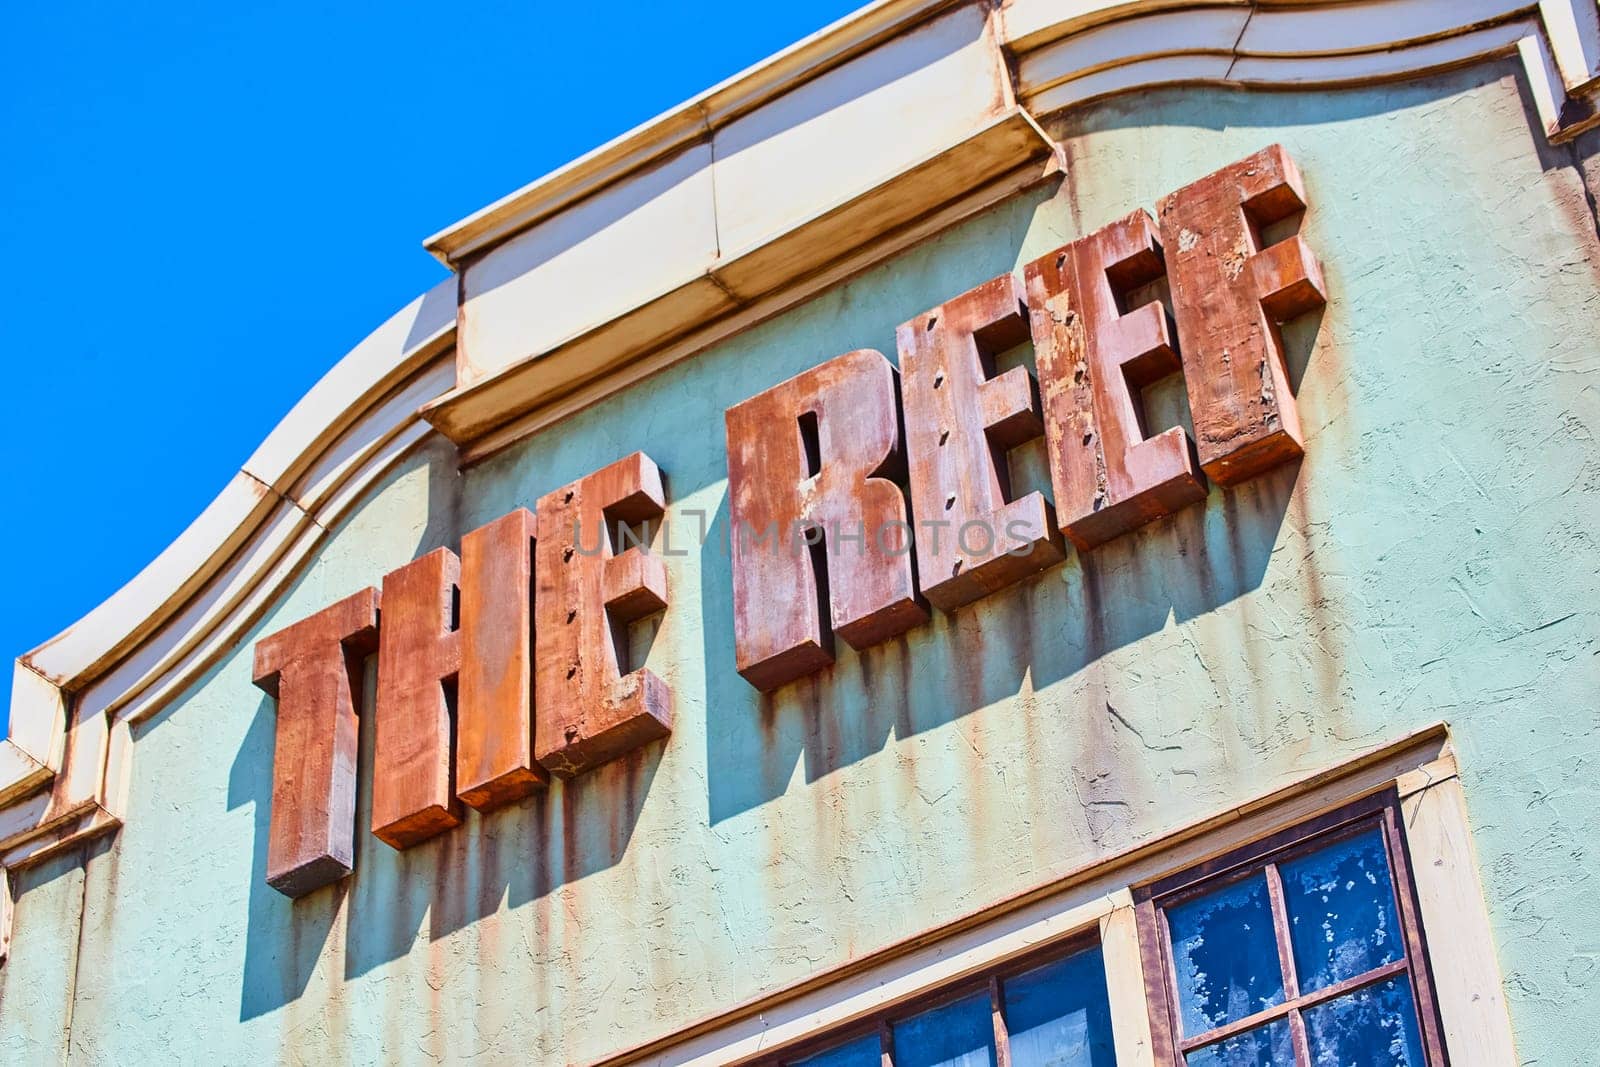 Vintage 'THE REEF' sign on a rustic sea green wall, showcasing historical decay under bright daylight.